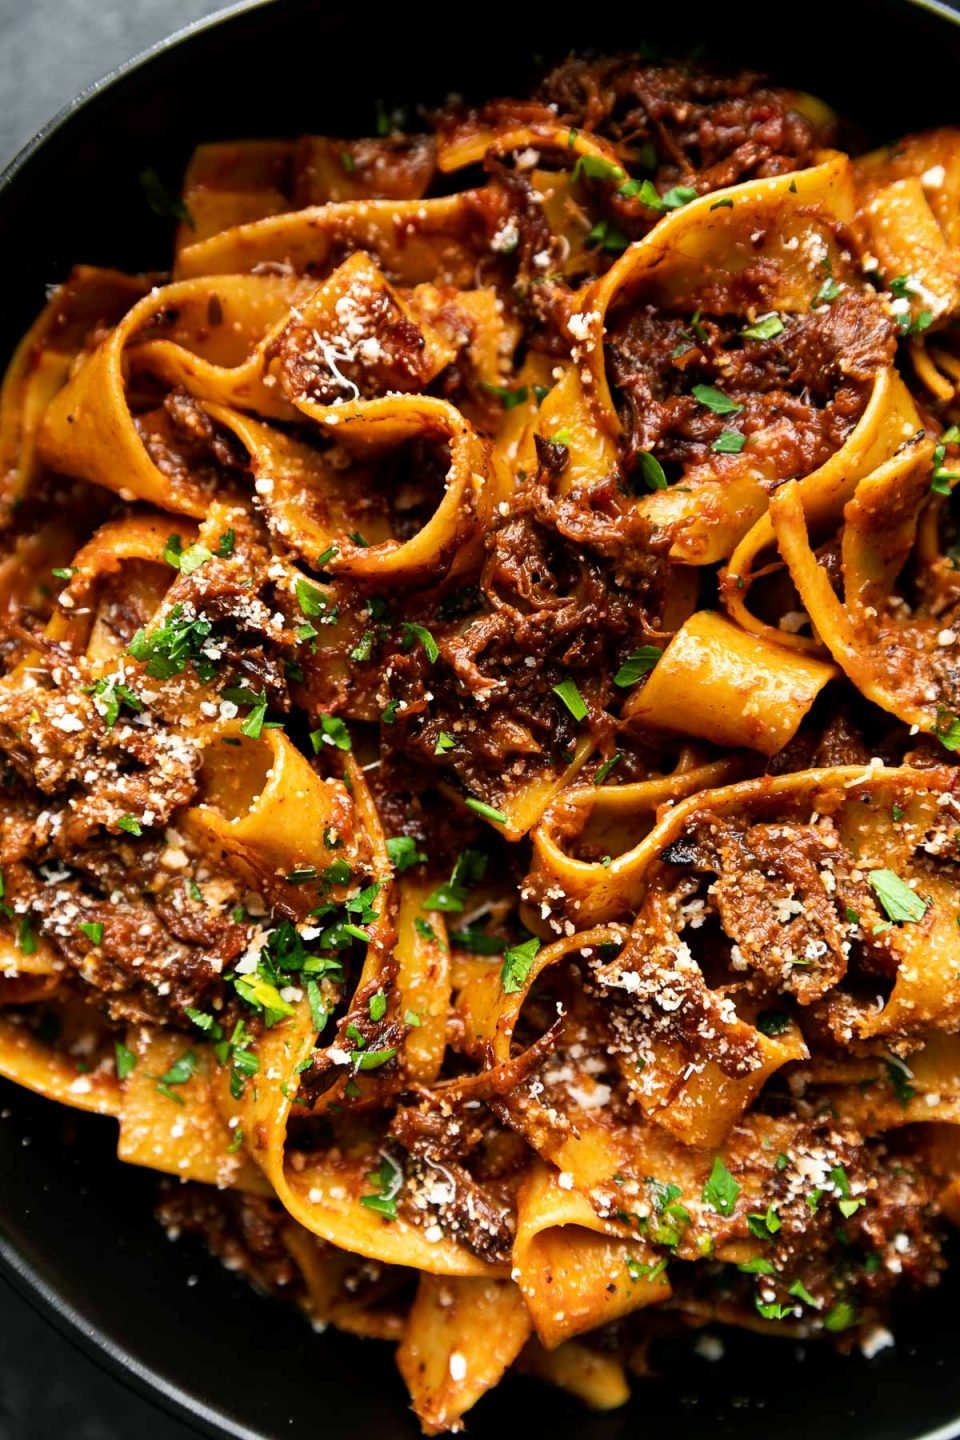 An overhead shot of Braised Short Rib Ragu Pappardelle shown in a black pasta bowl, topped with grated parmesan & fresh parsley. The bowls sit atop a black surface.